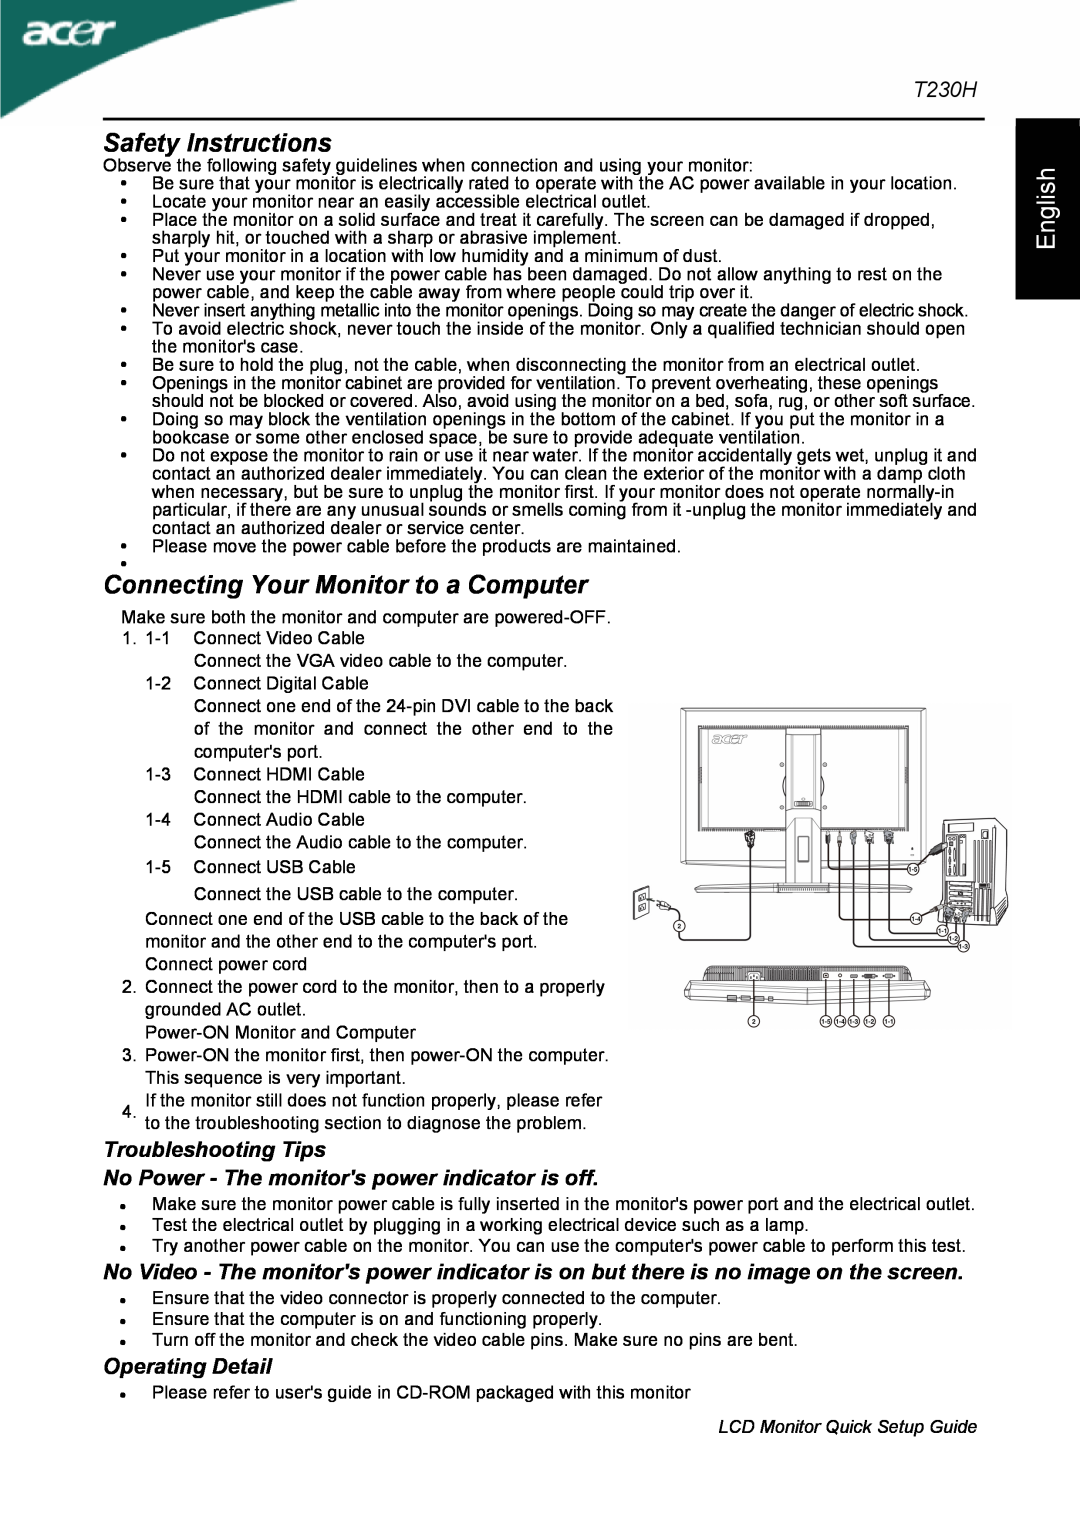 Acer T230H setup guide English, Safety Instructions, Connecting Your Monitor to a Computer, Operating Detail 